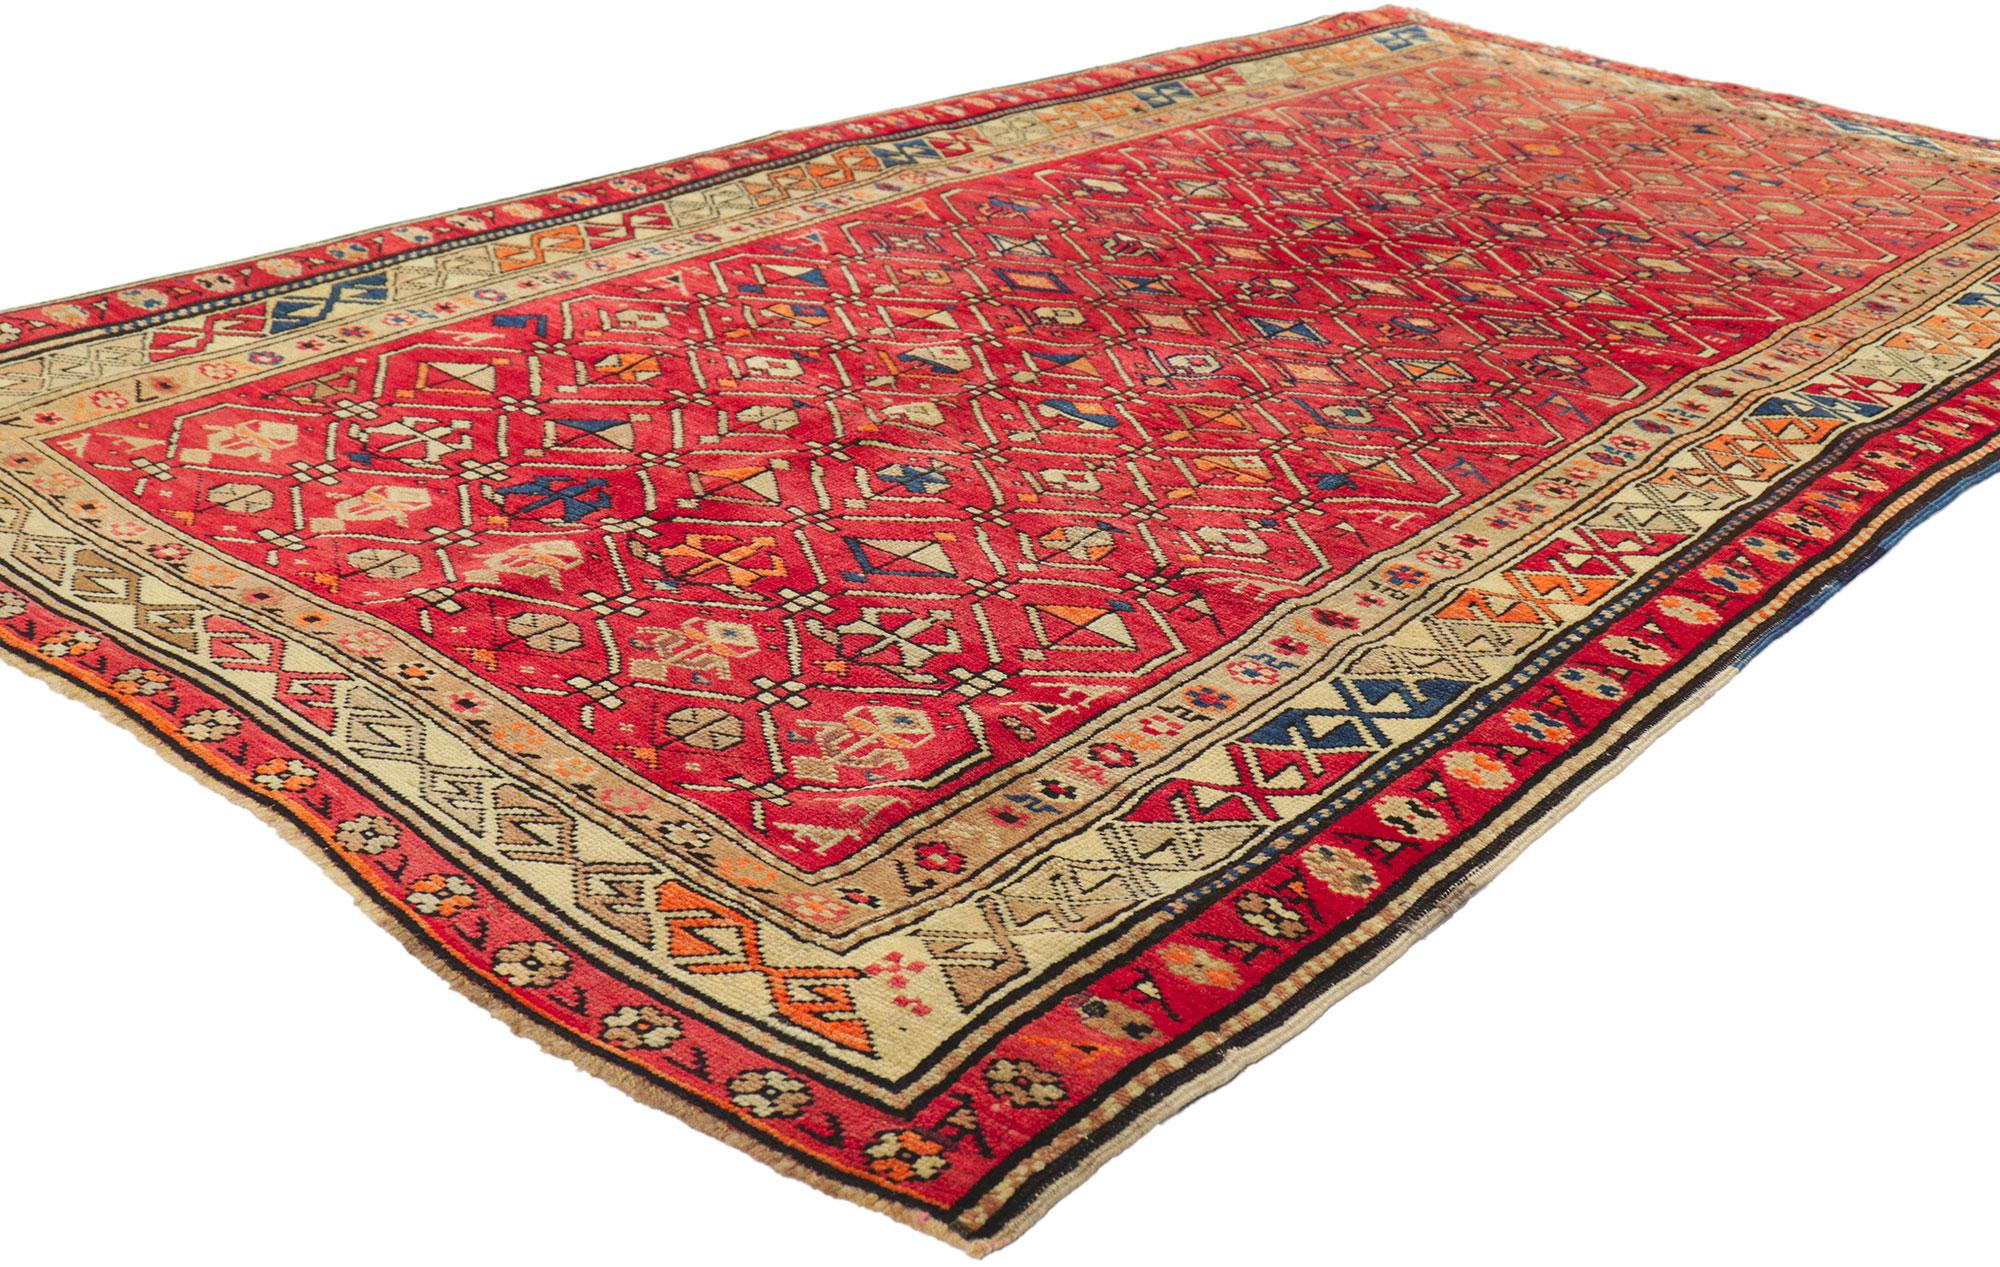 51554 Vintage Turkish Oushak Rug, 03'11 X 06'11. 
Emanating nomadic charm with incredible detail and texture, this hand knotted wool vintage Turkish Oushak rug is a captivating vision of woven beauty. The intricate honeycomb lattice design and